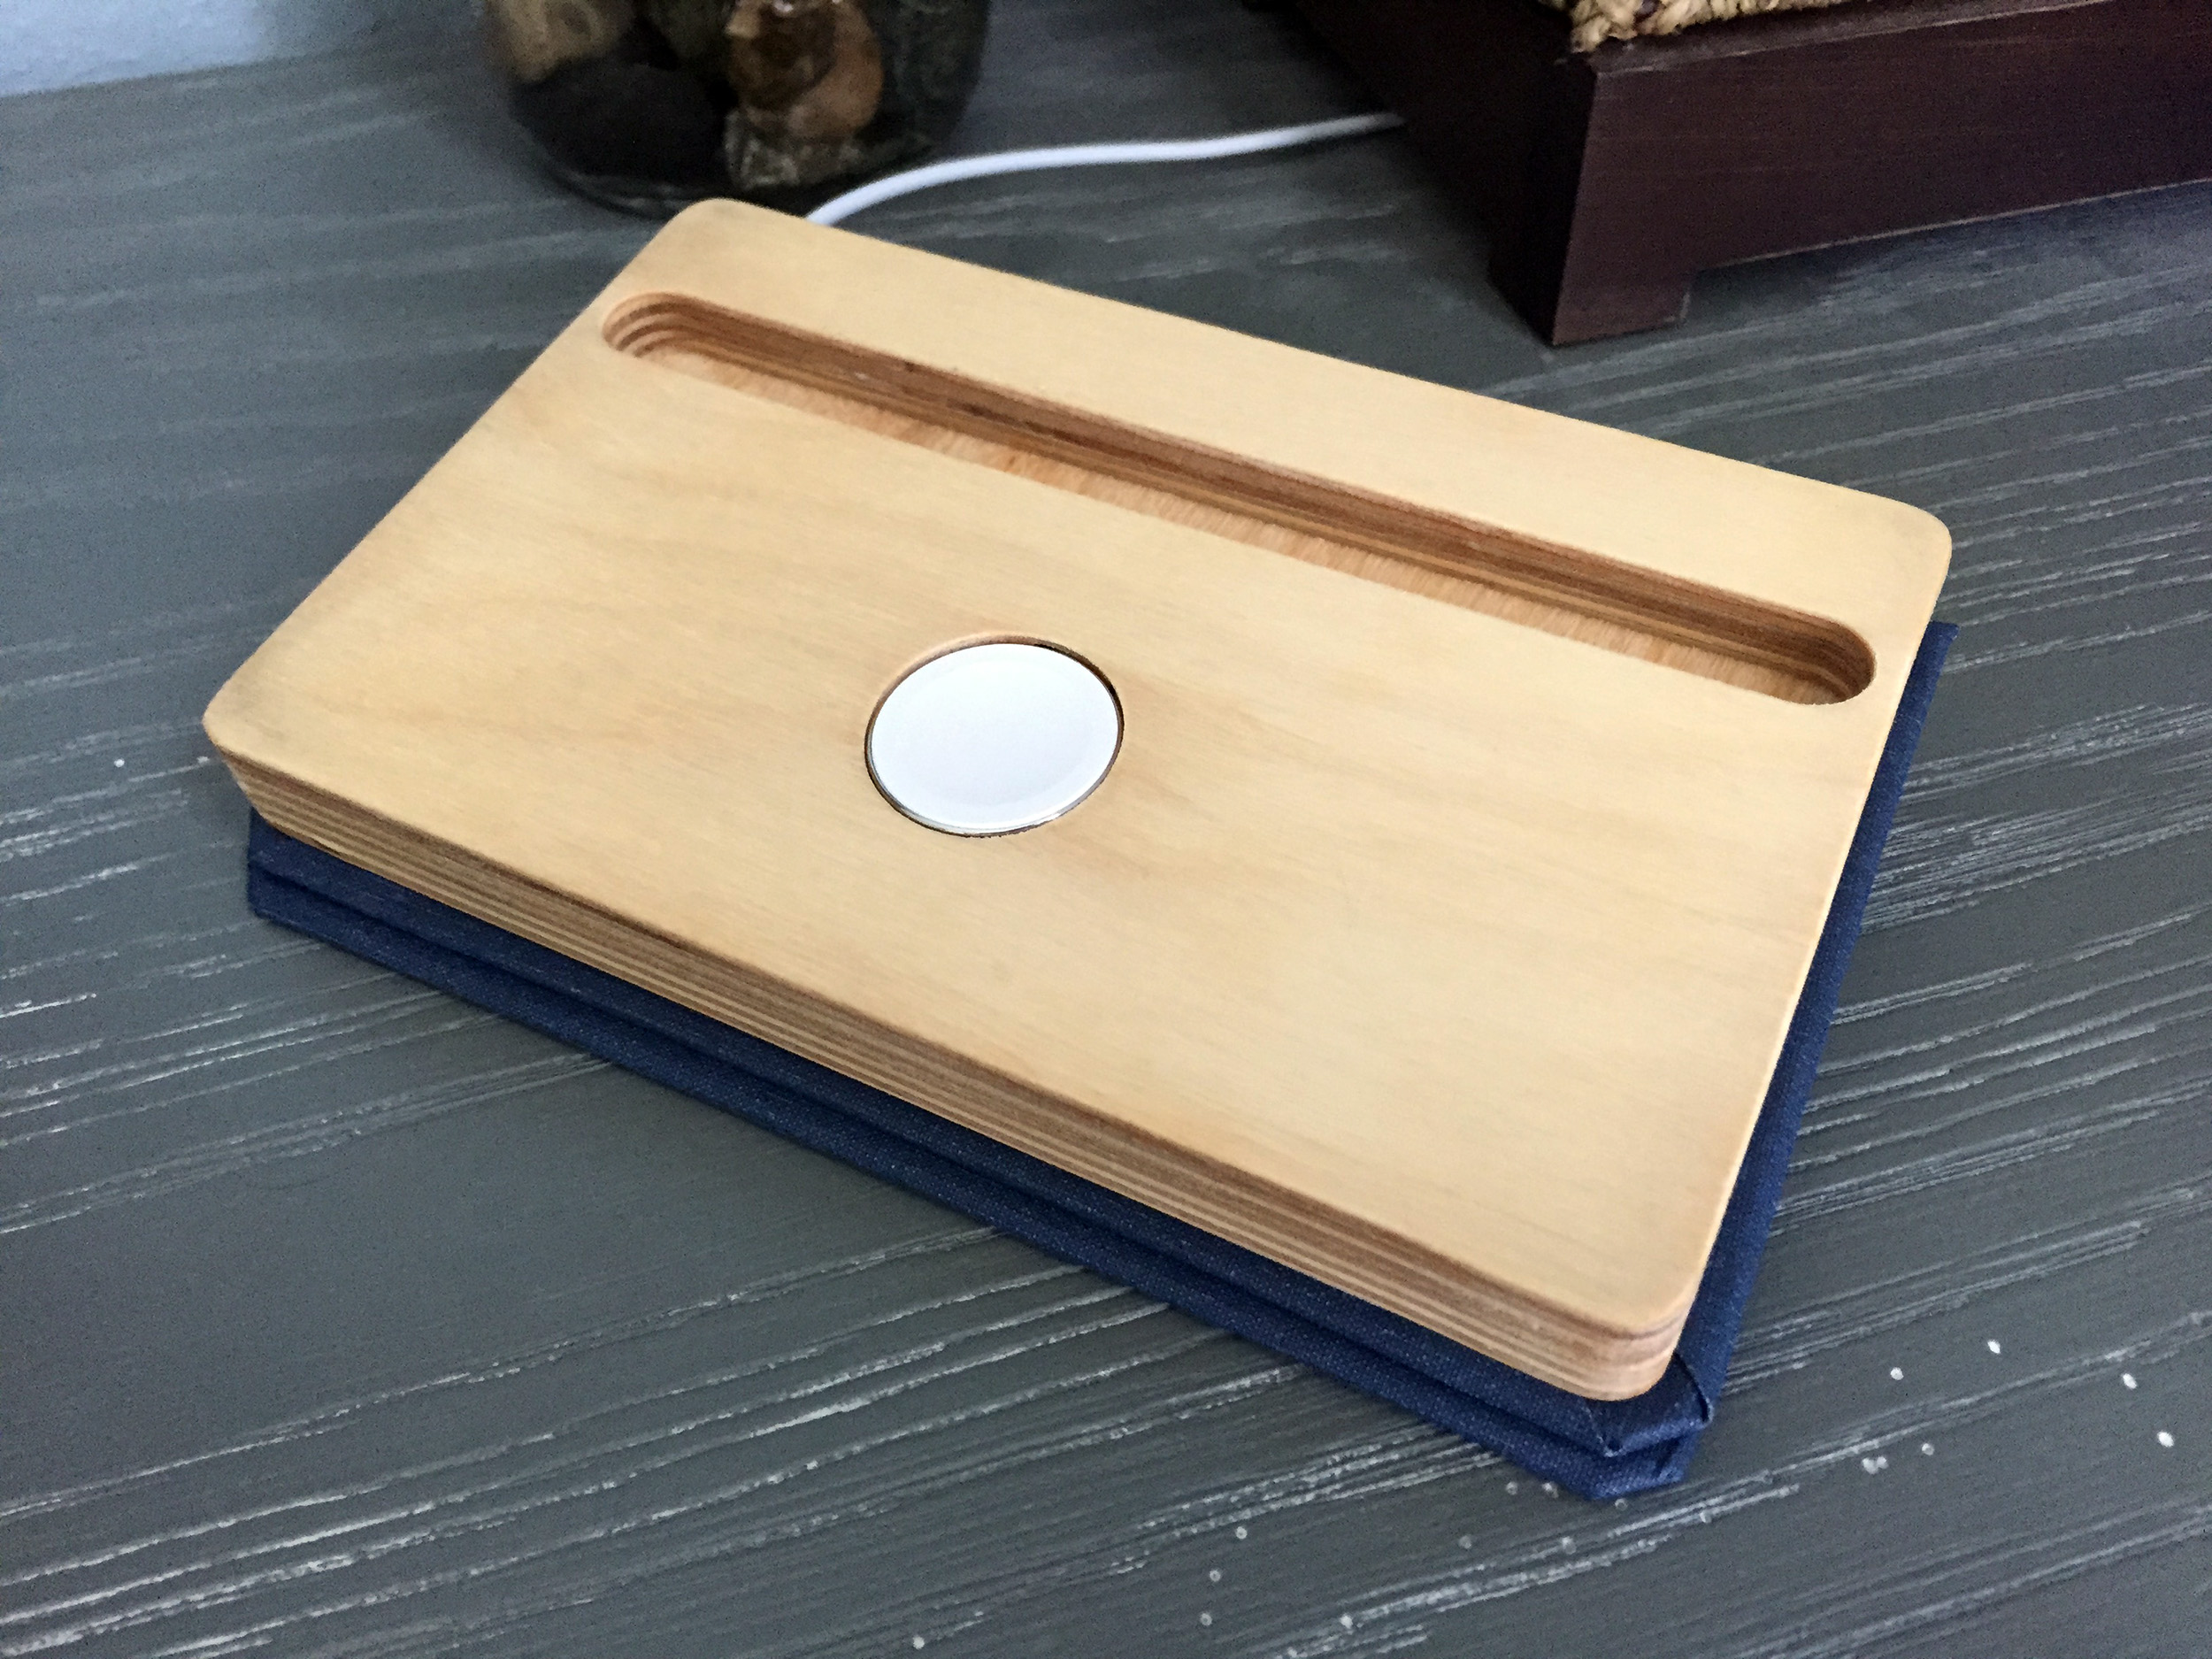 Giveaway: The DODOcase $80 Apple Watch and iPhone charging solution ...